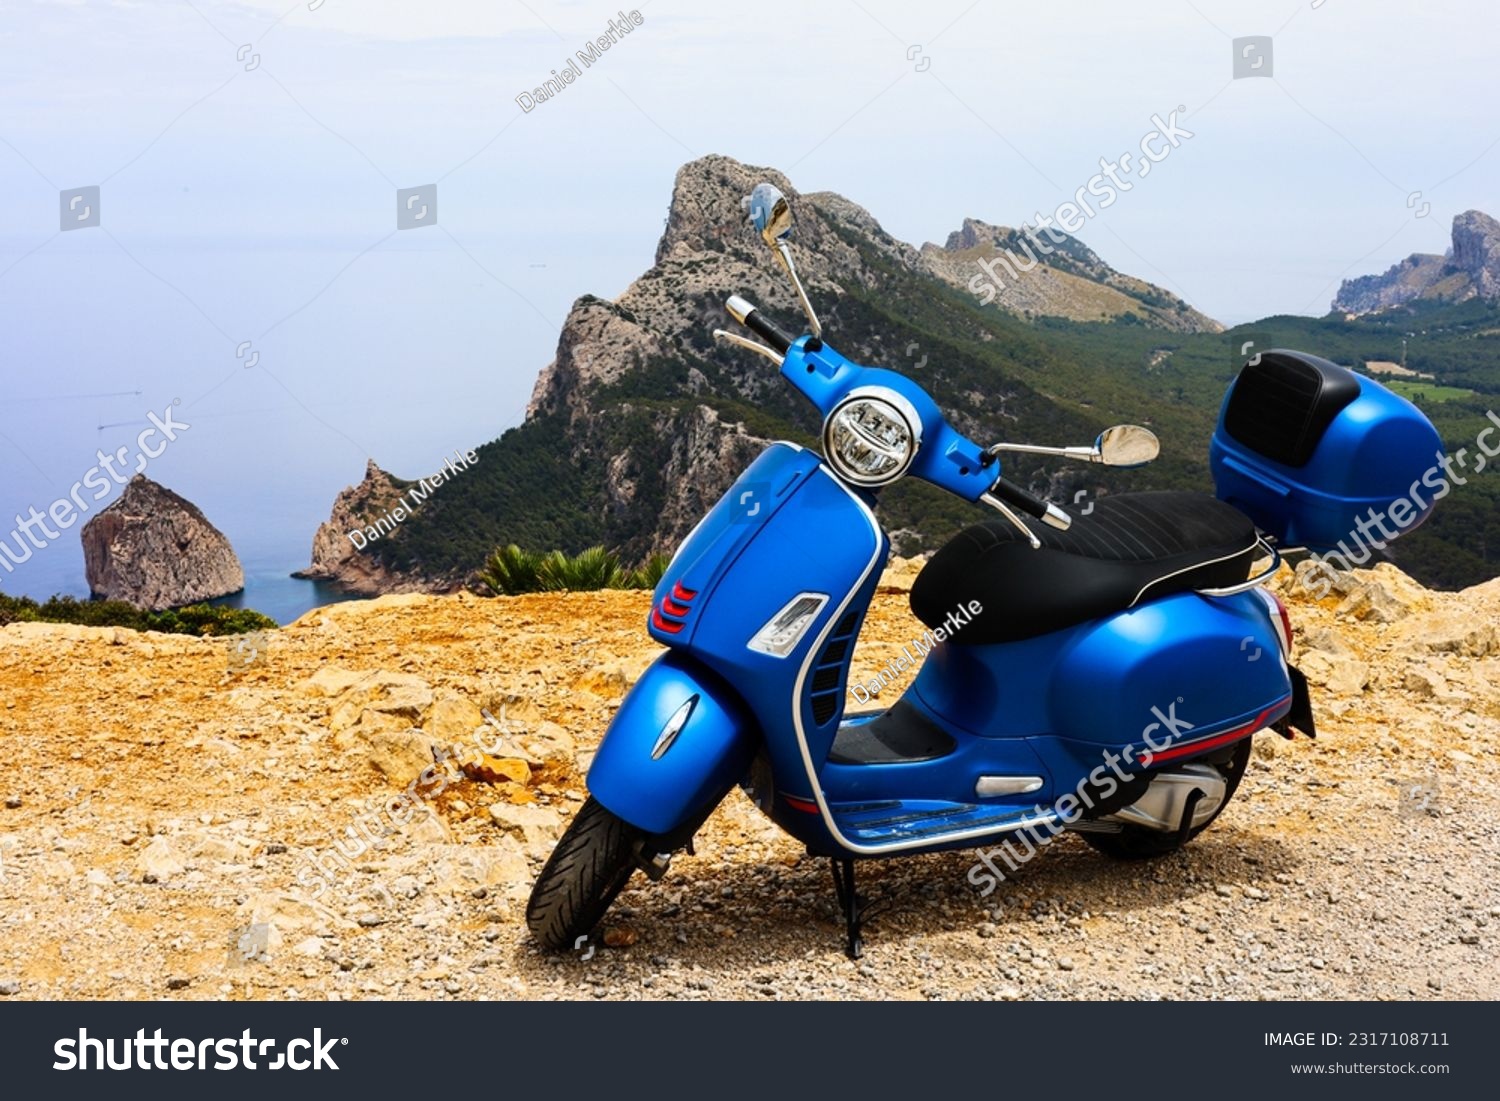 Blue motor scooter on coastal road with sea and rocks in background. High quality photo #2317108711